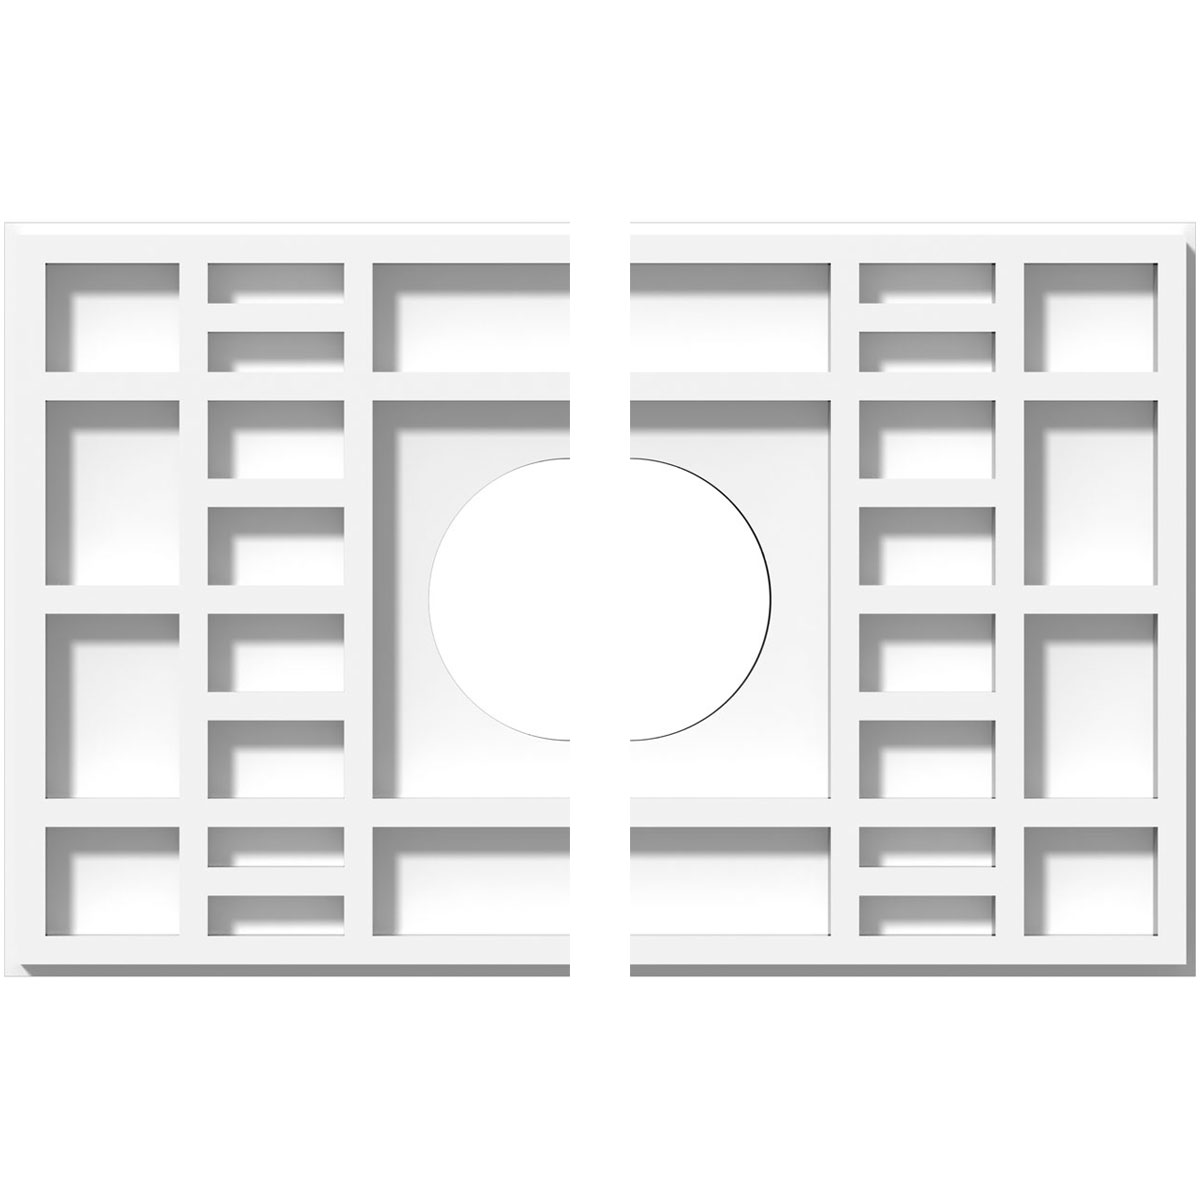 Cmp12x8bx2-03000 3 In. Id X 4 In. Rectangle Beaux Architectural Grade Pvc Contemporary Ceiling Medallion - 2 Piece